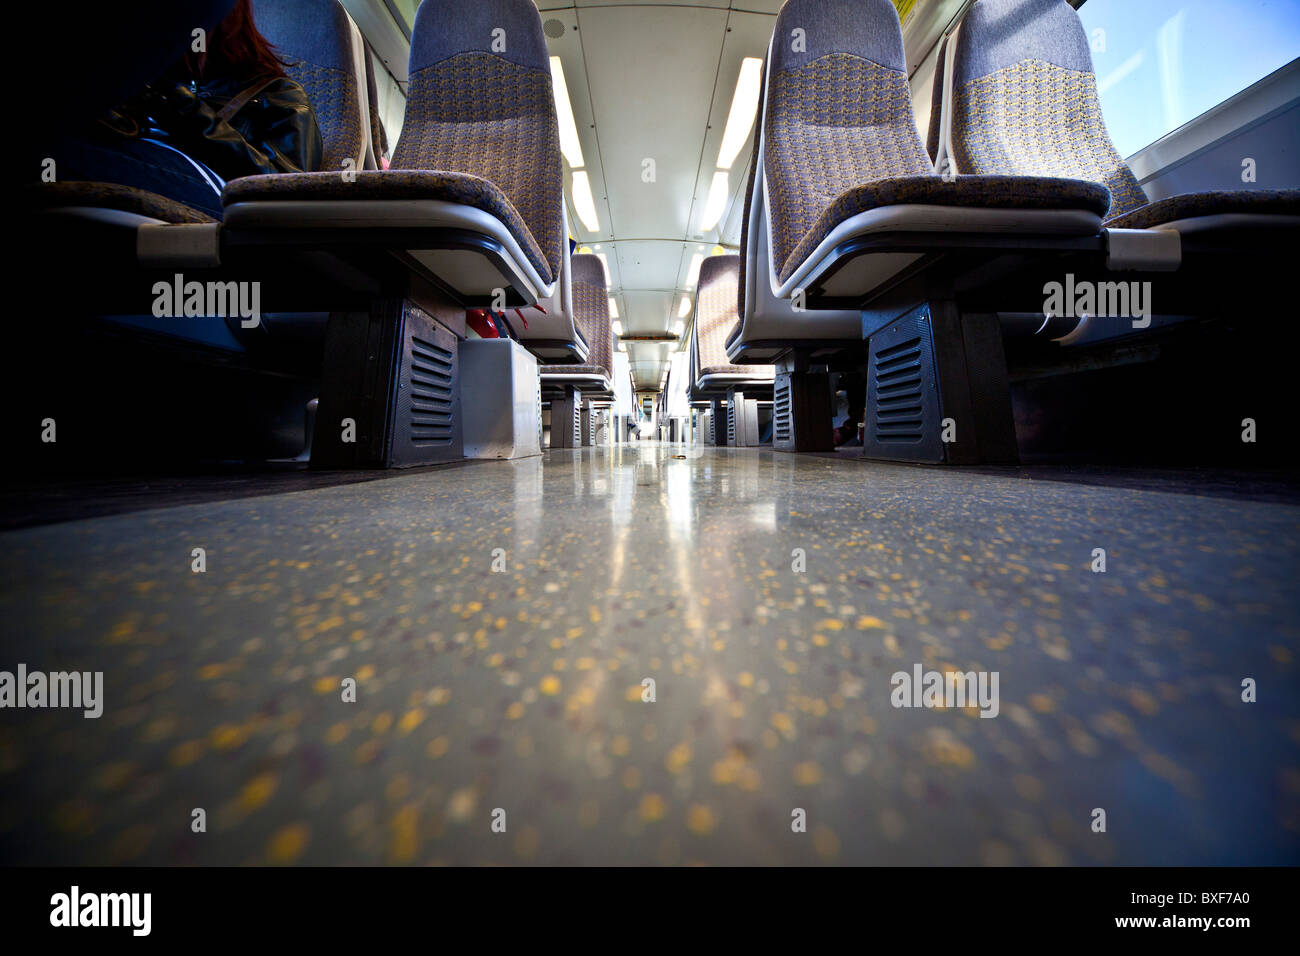 Interior of a train carriage Stock Photo